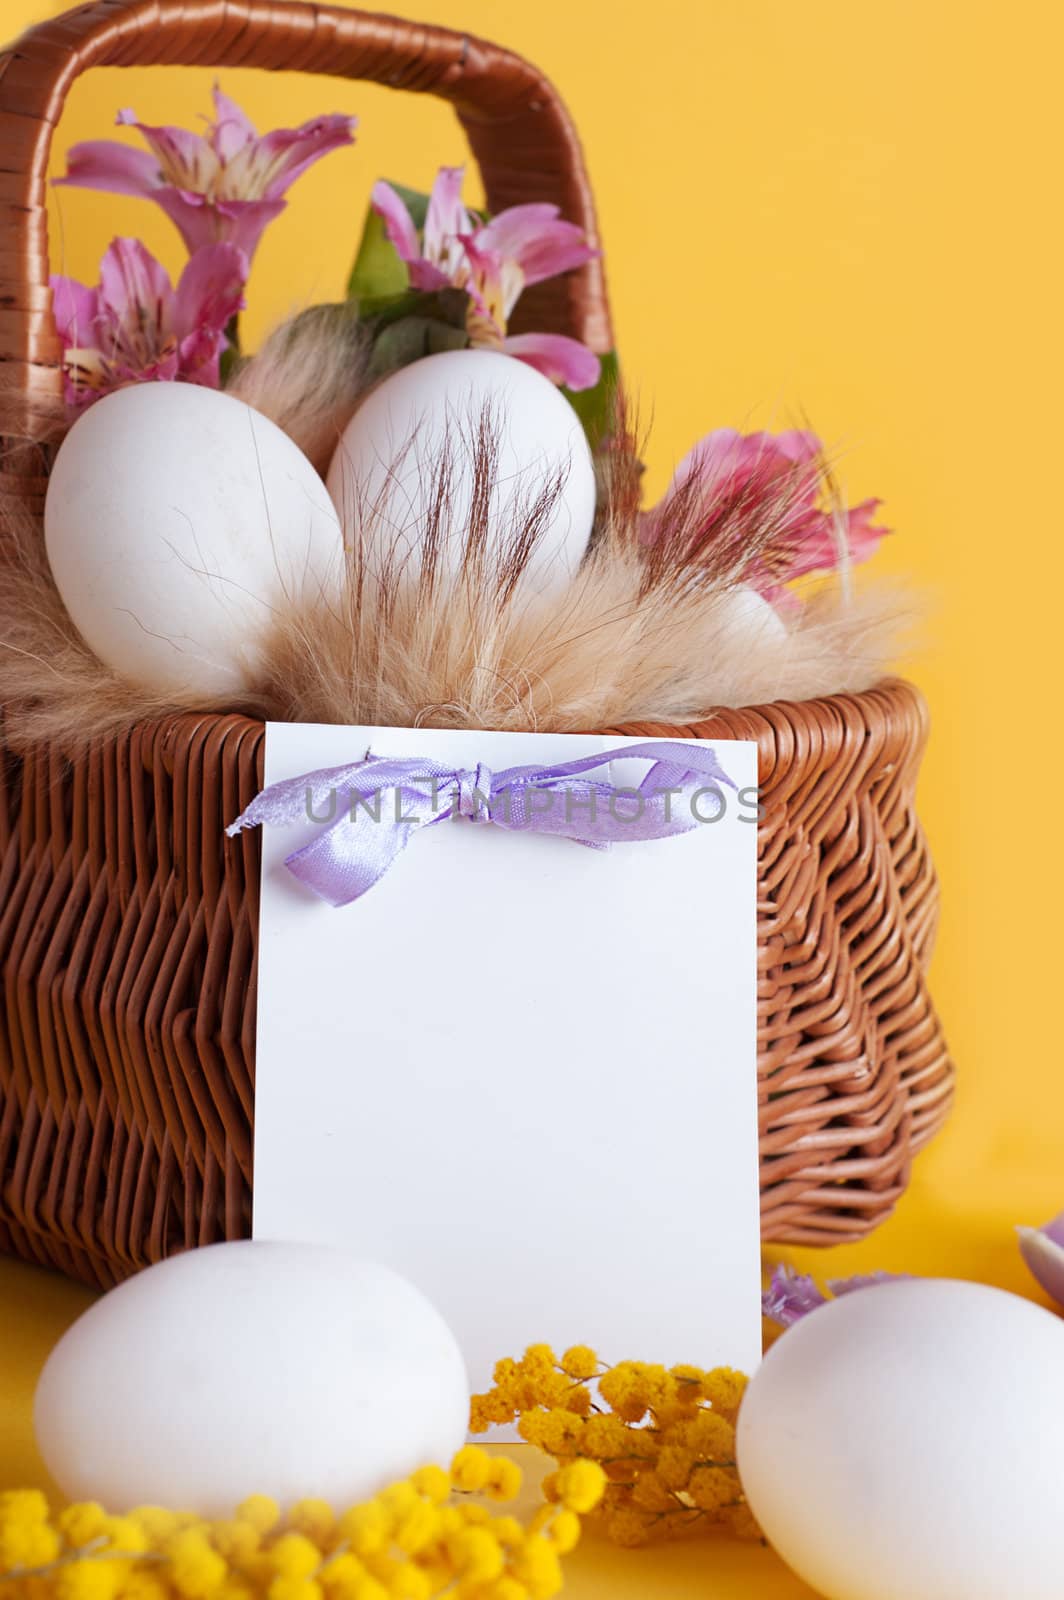 Basket of eggs and spring flowers by Angel_a